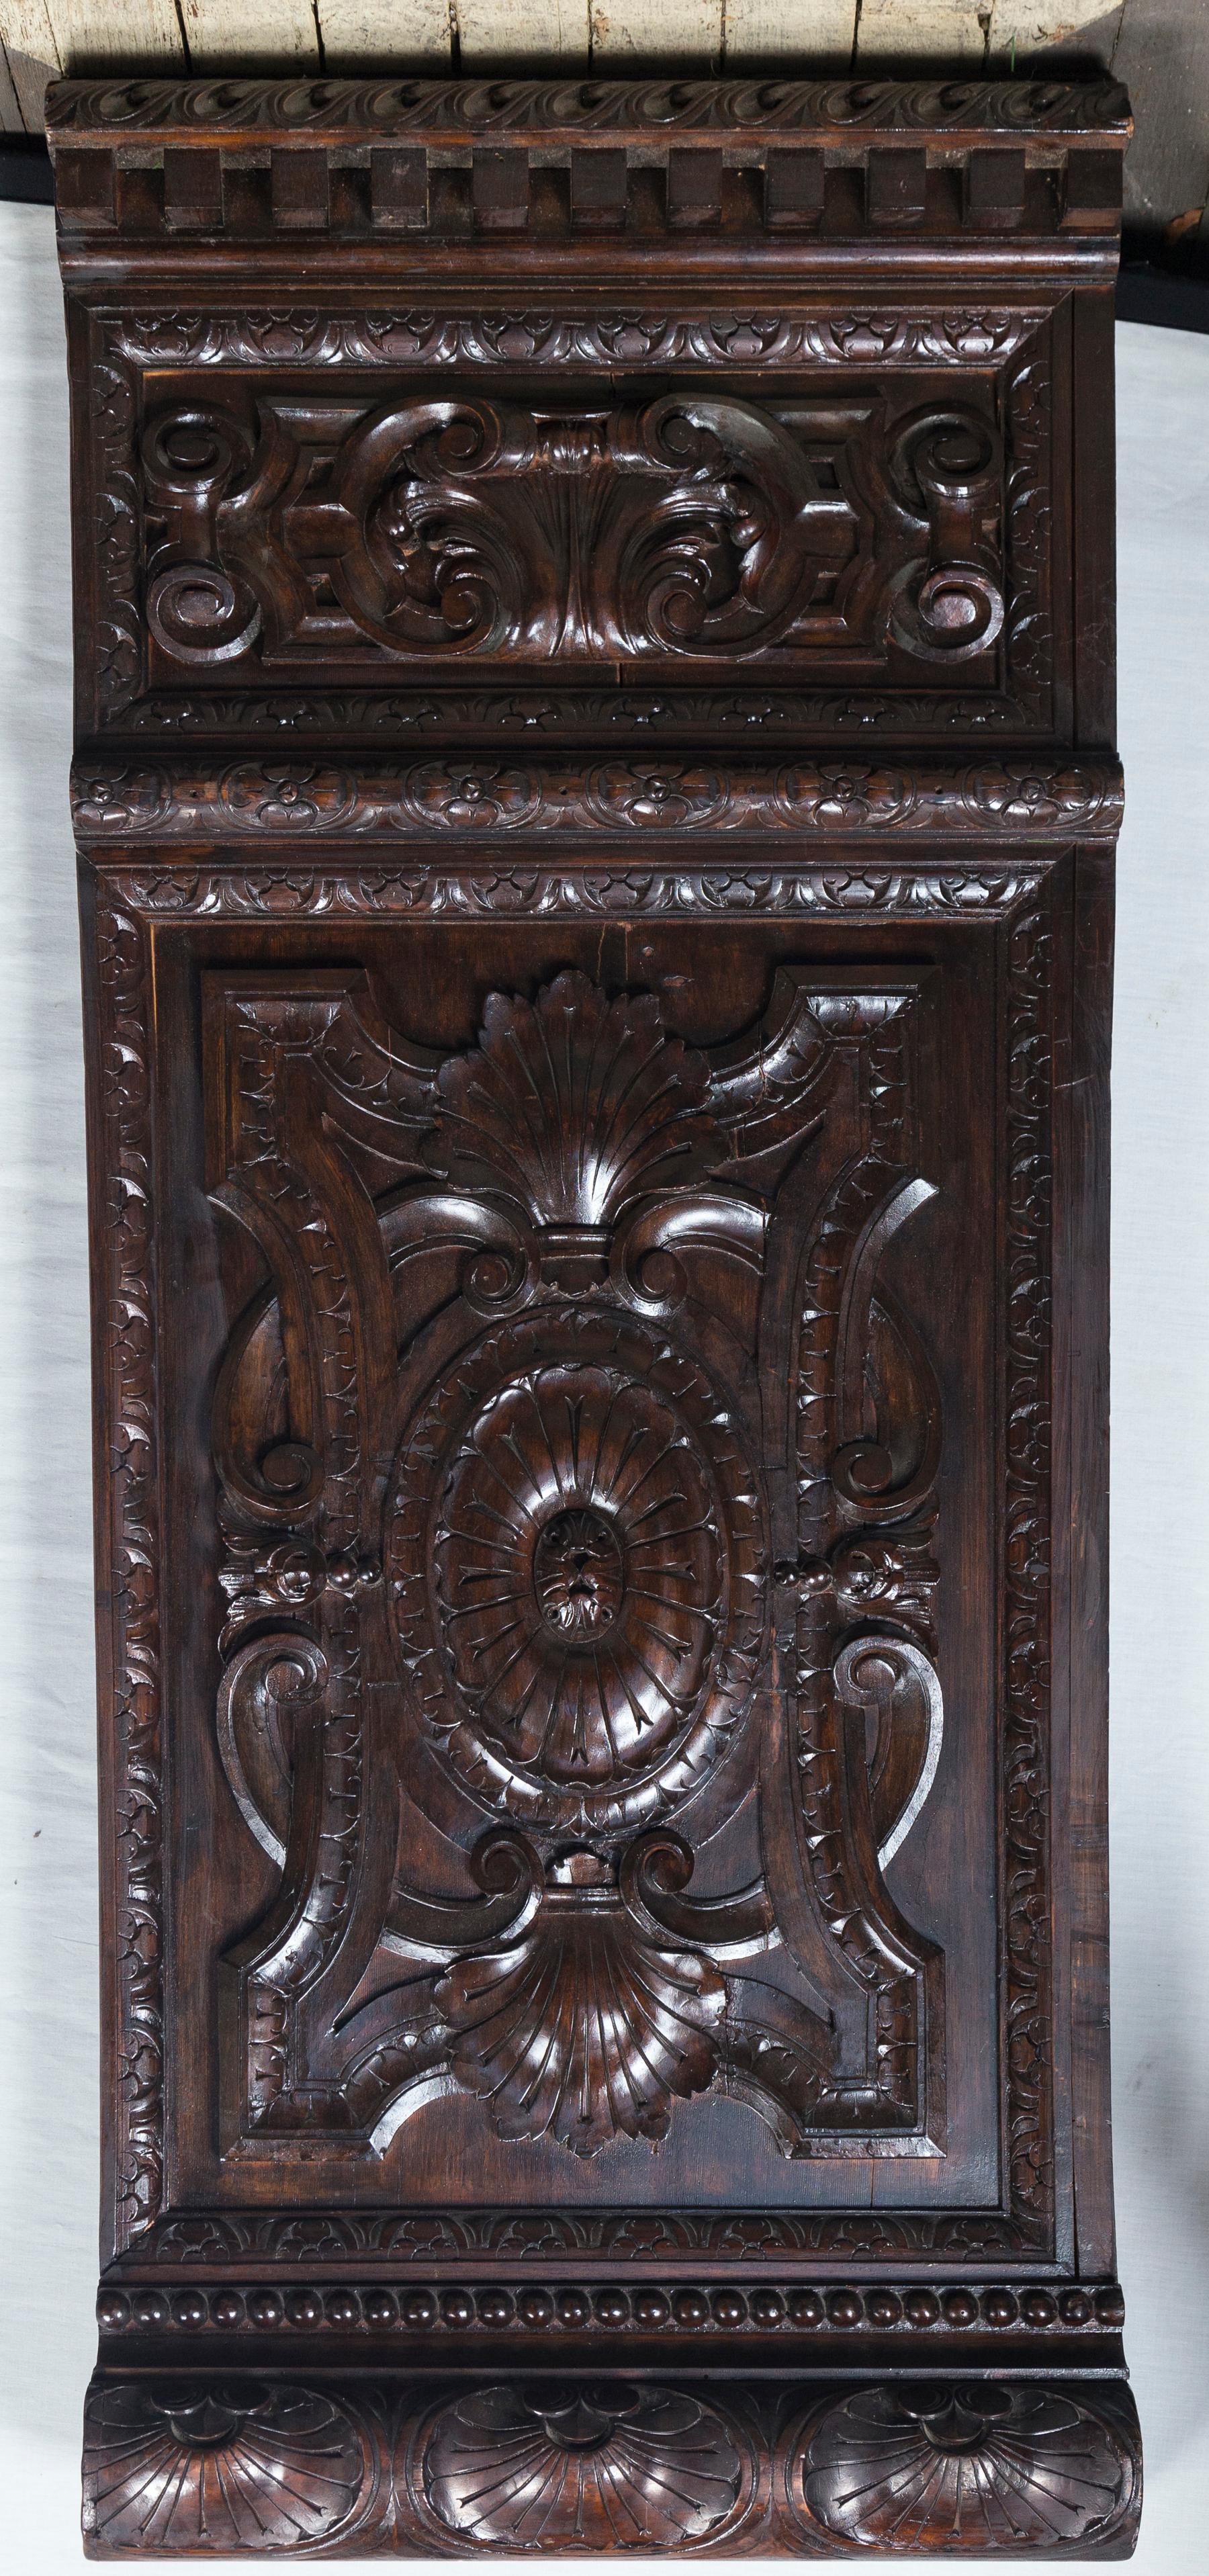 These panels are probably of mahogany. Carved fluted top edge. Dental molding below. Below is an inset panel showing a shell, within a carved frame. And C scrolls. Below that is carved molding which sits above another inset panel, decorated with